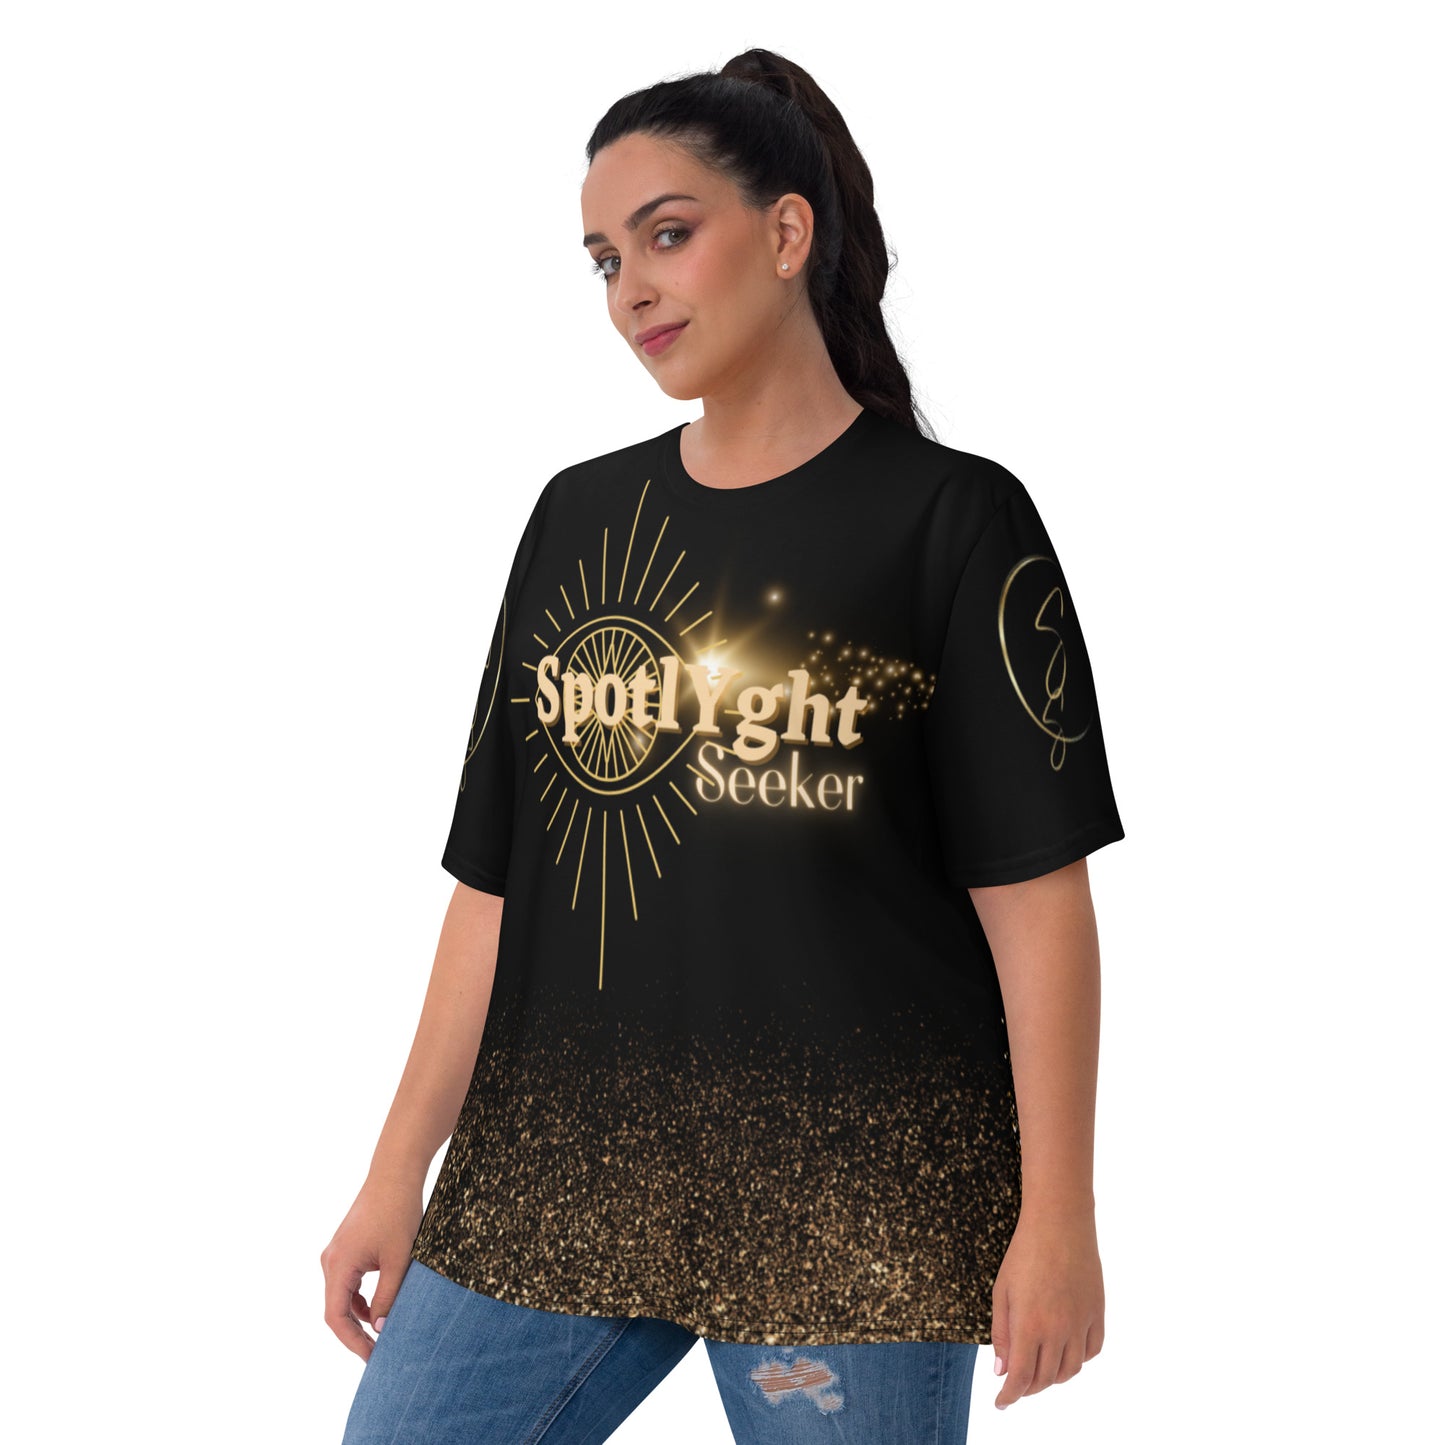 In the Eye of the SpotlYght Women's T-shirt